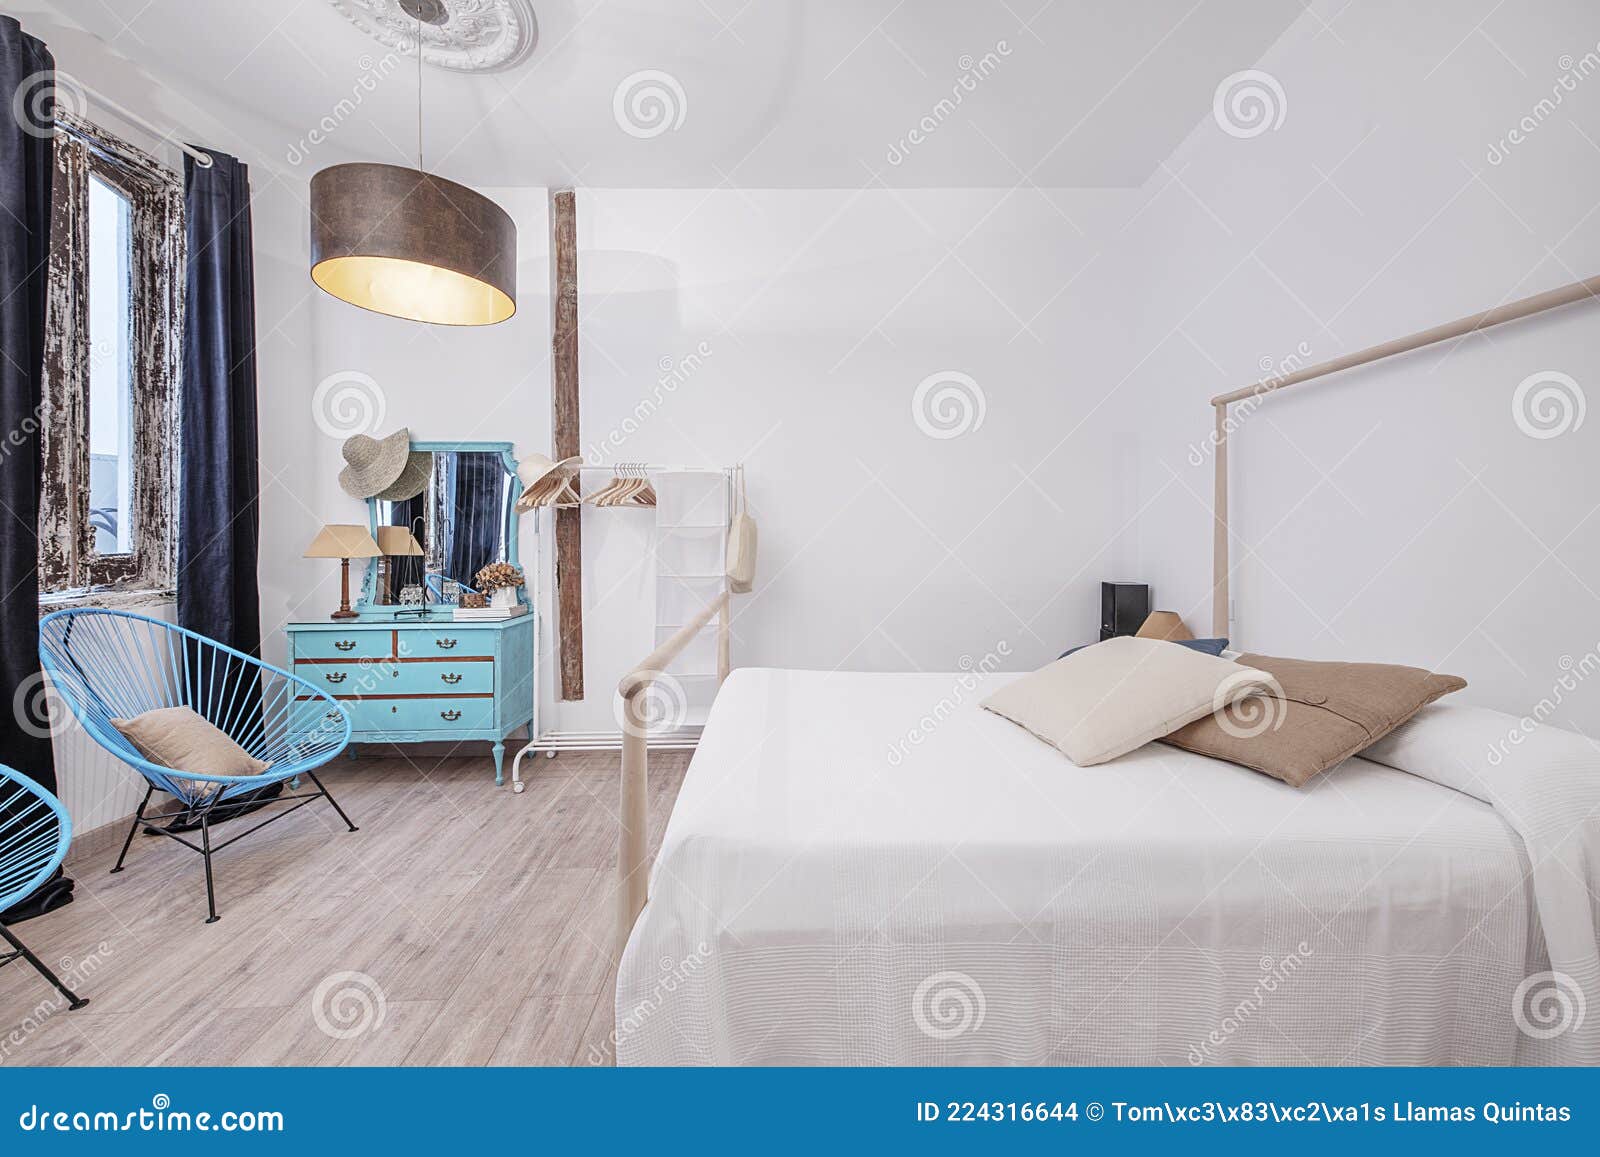 bedroom in vacation apartment with blue dresser and blue armchairs.